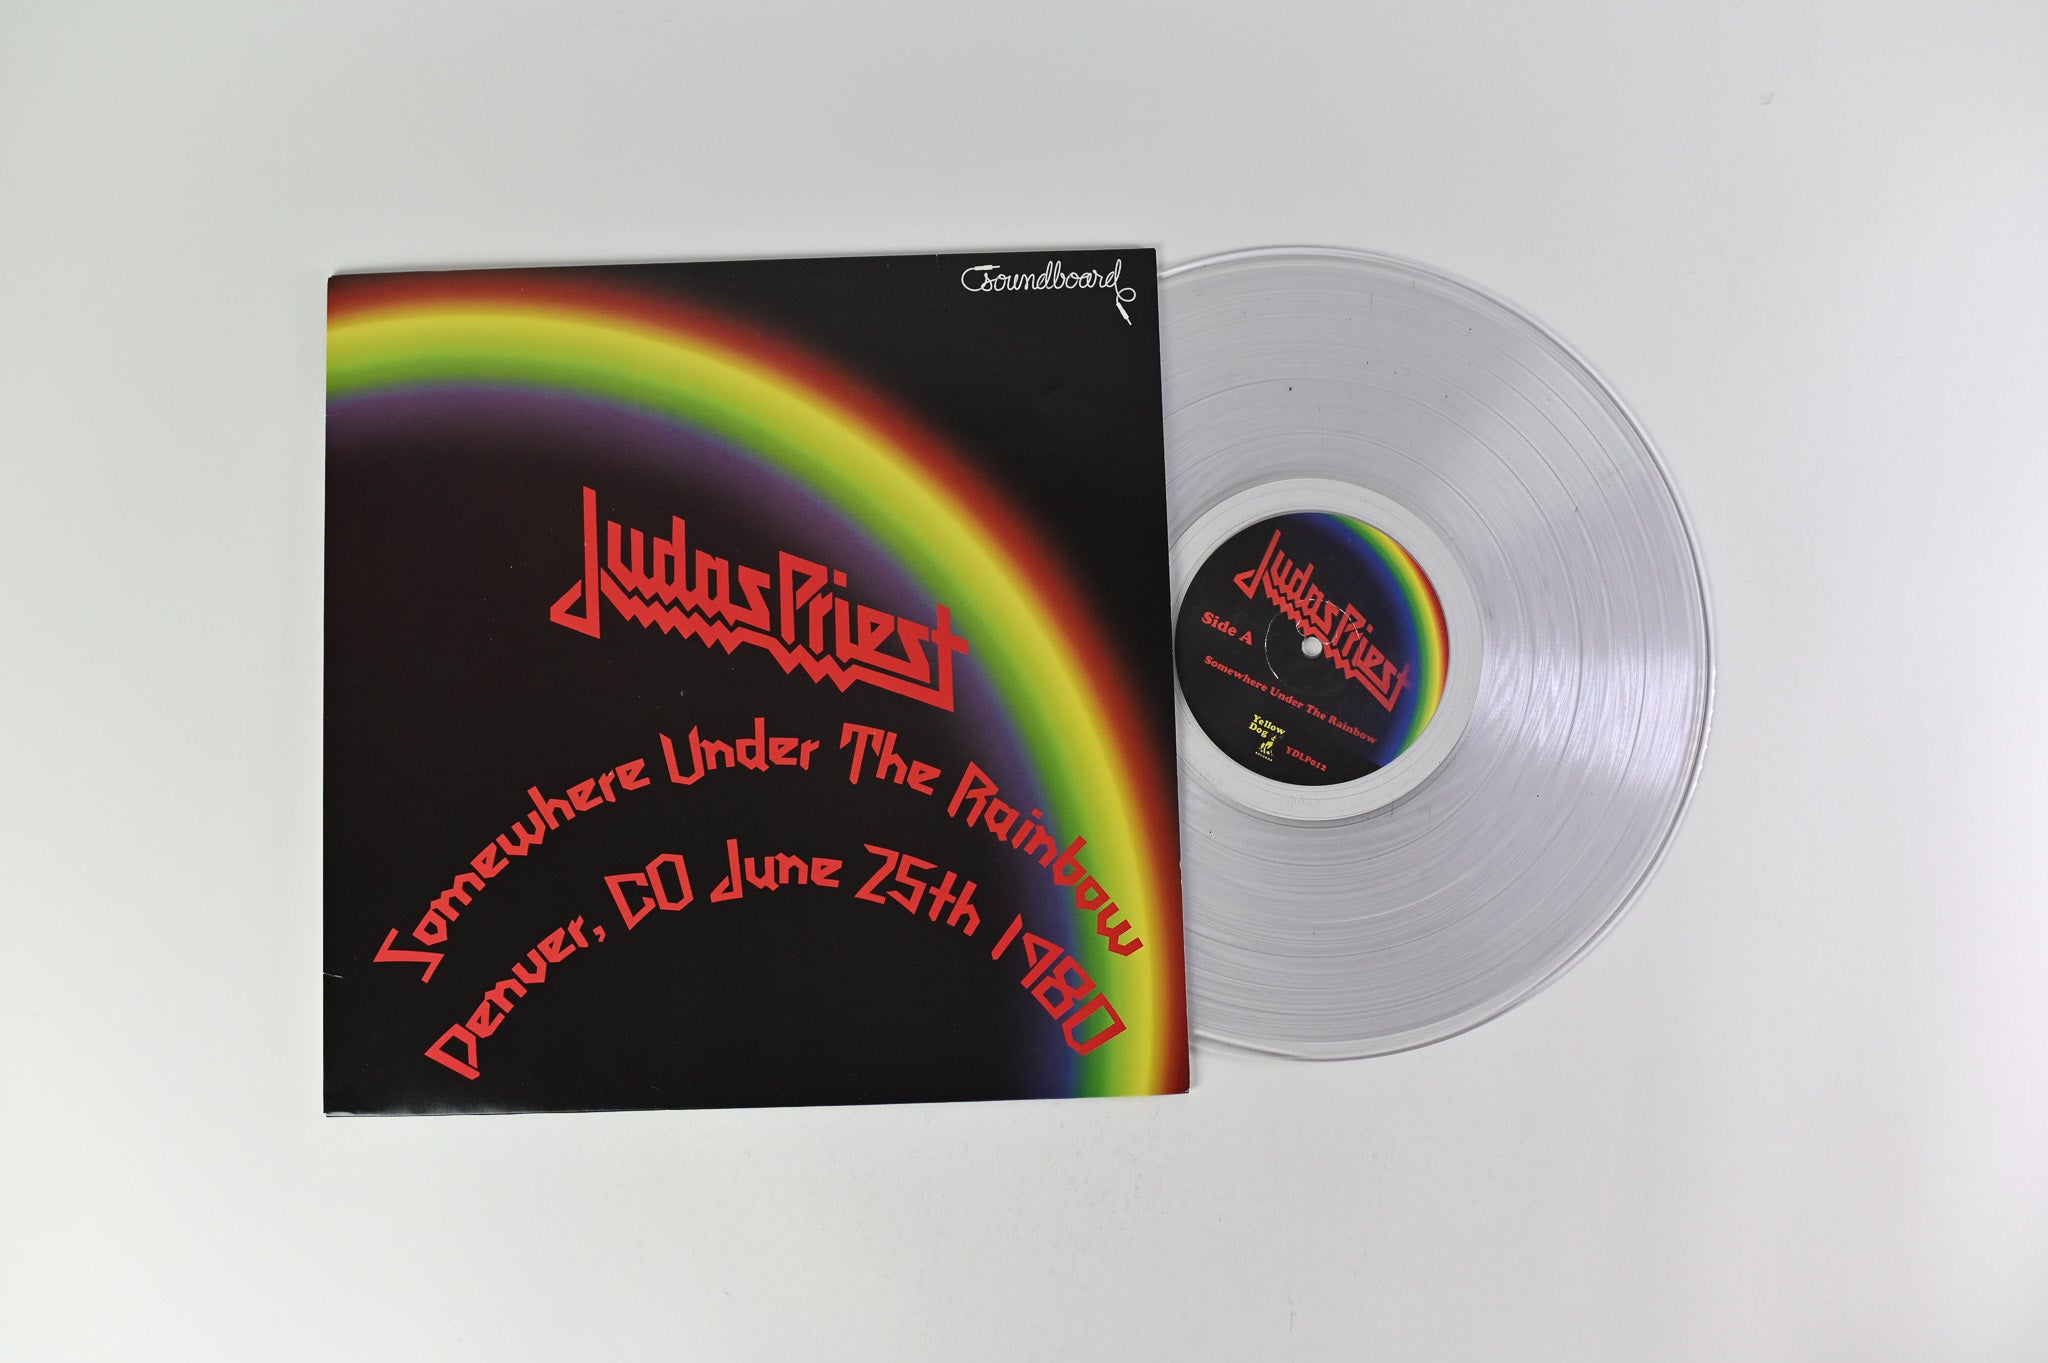 Judas Priest - Somewhere Under The Rainbow: Denver, CO June 25th 1980 Clear Unofficial Pressing